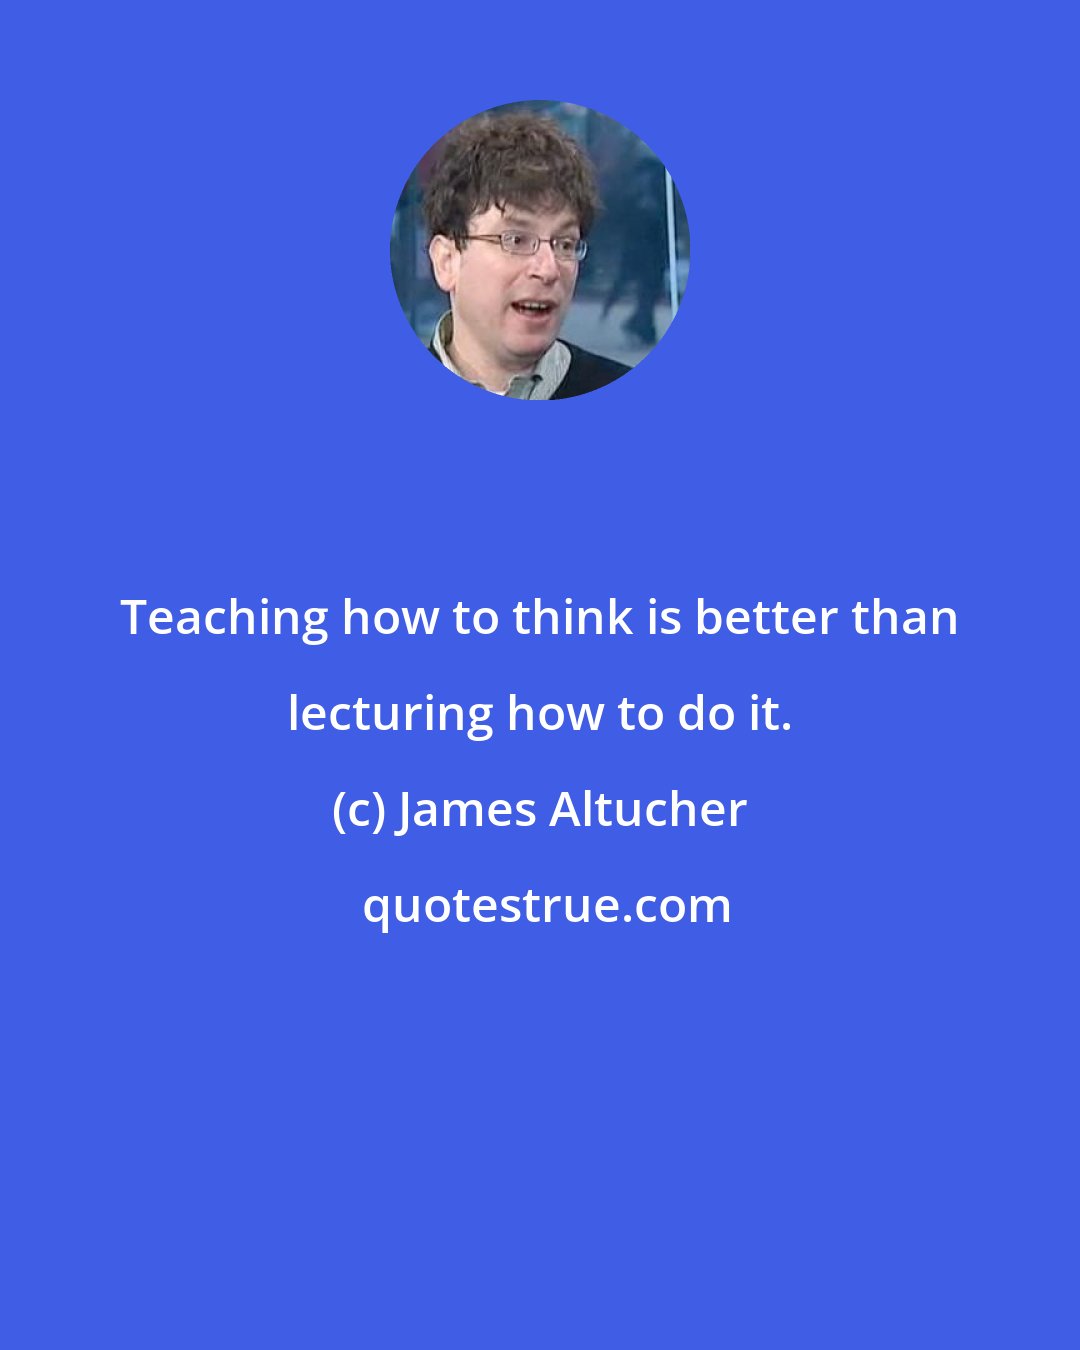 James Altucher: Teaching how to think is better than lecturing how to do it.